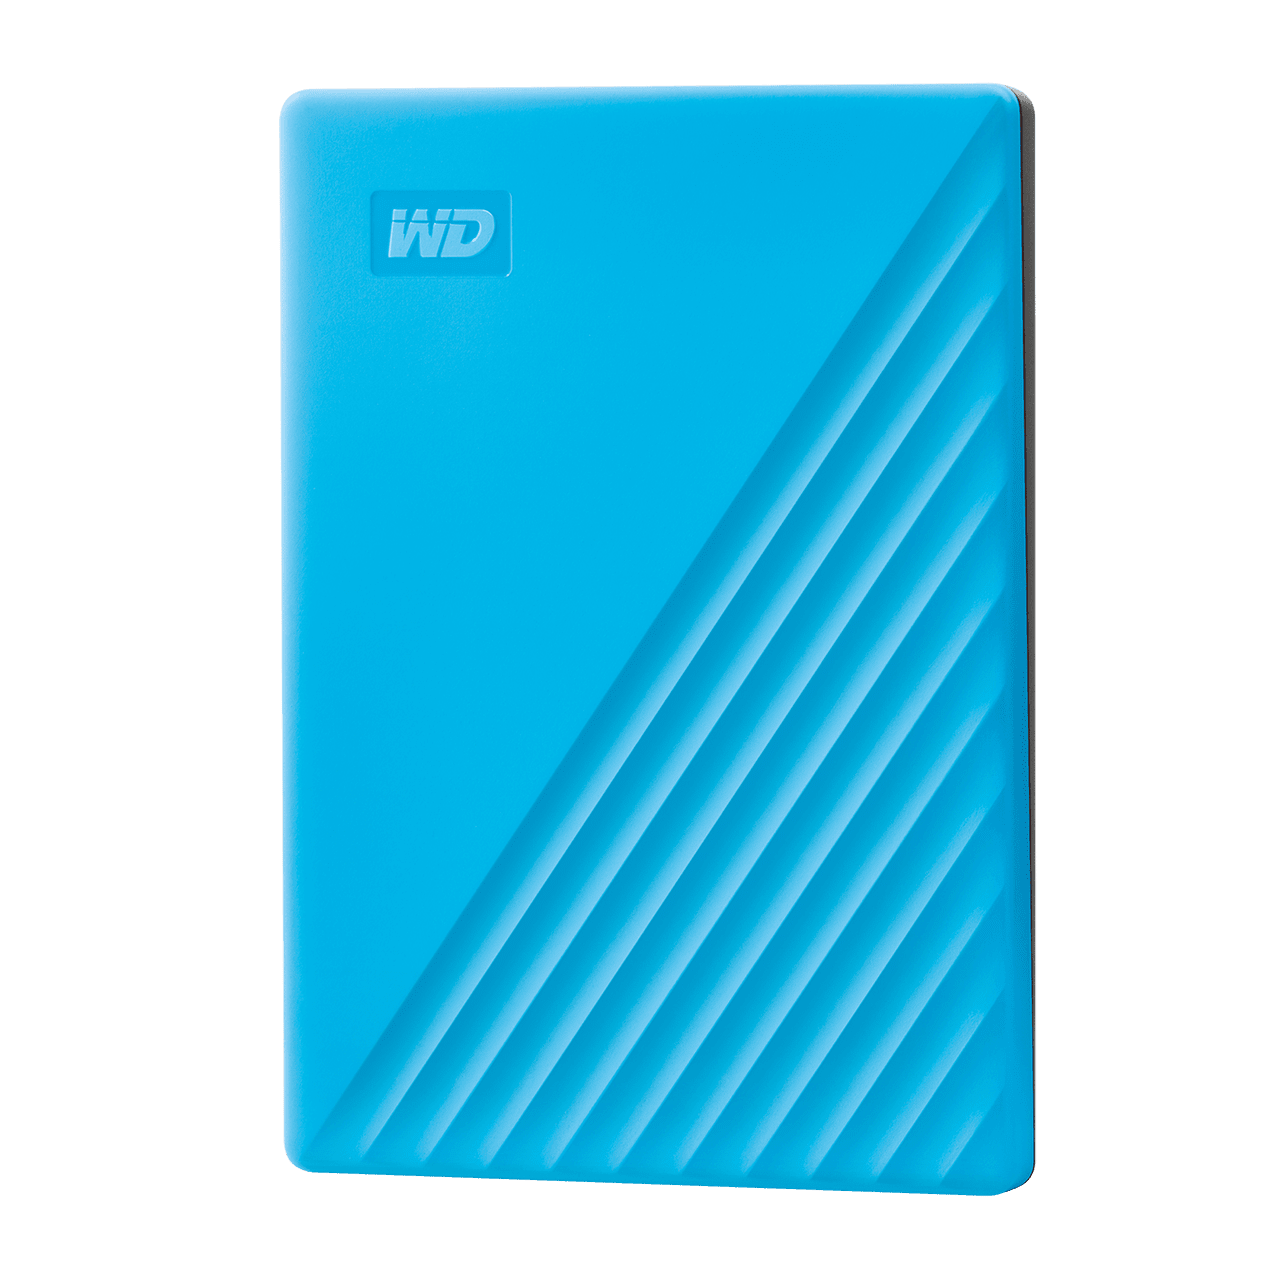 WD Western Digital My Passport 1TB Slim Portable External Hard Disk USB 3.0 With WD Backup Software & Password Protection